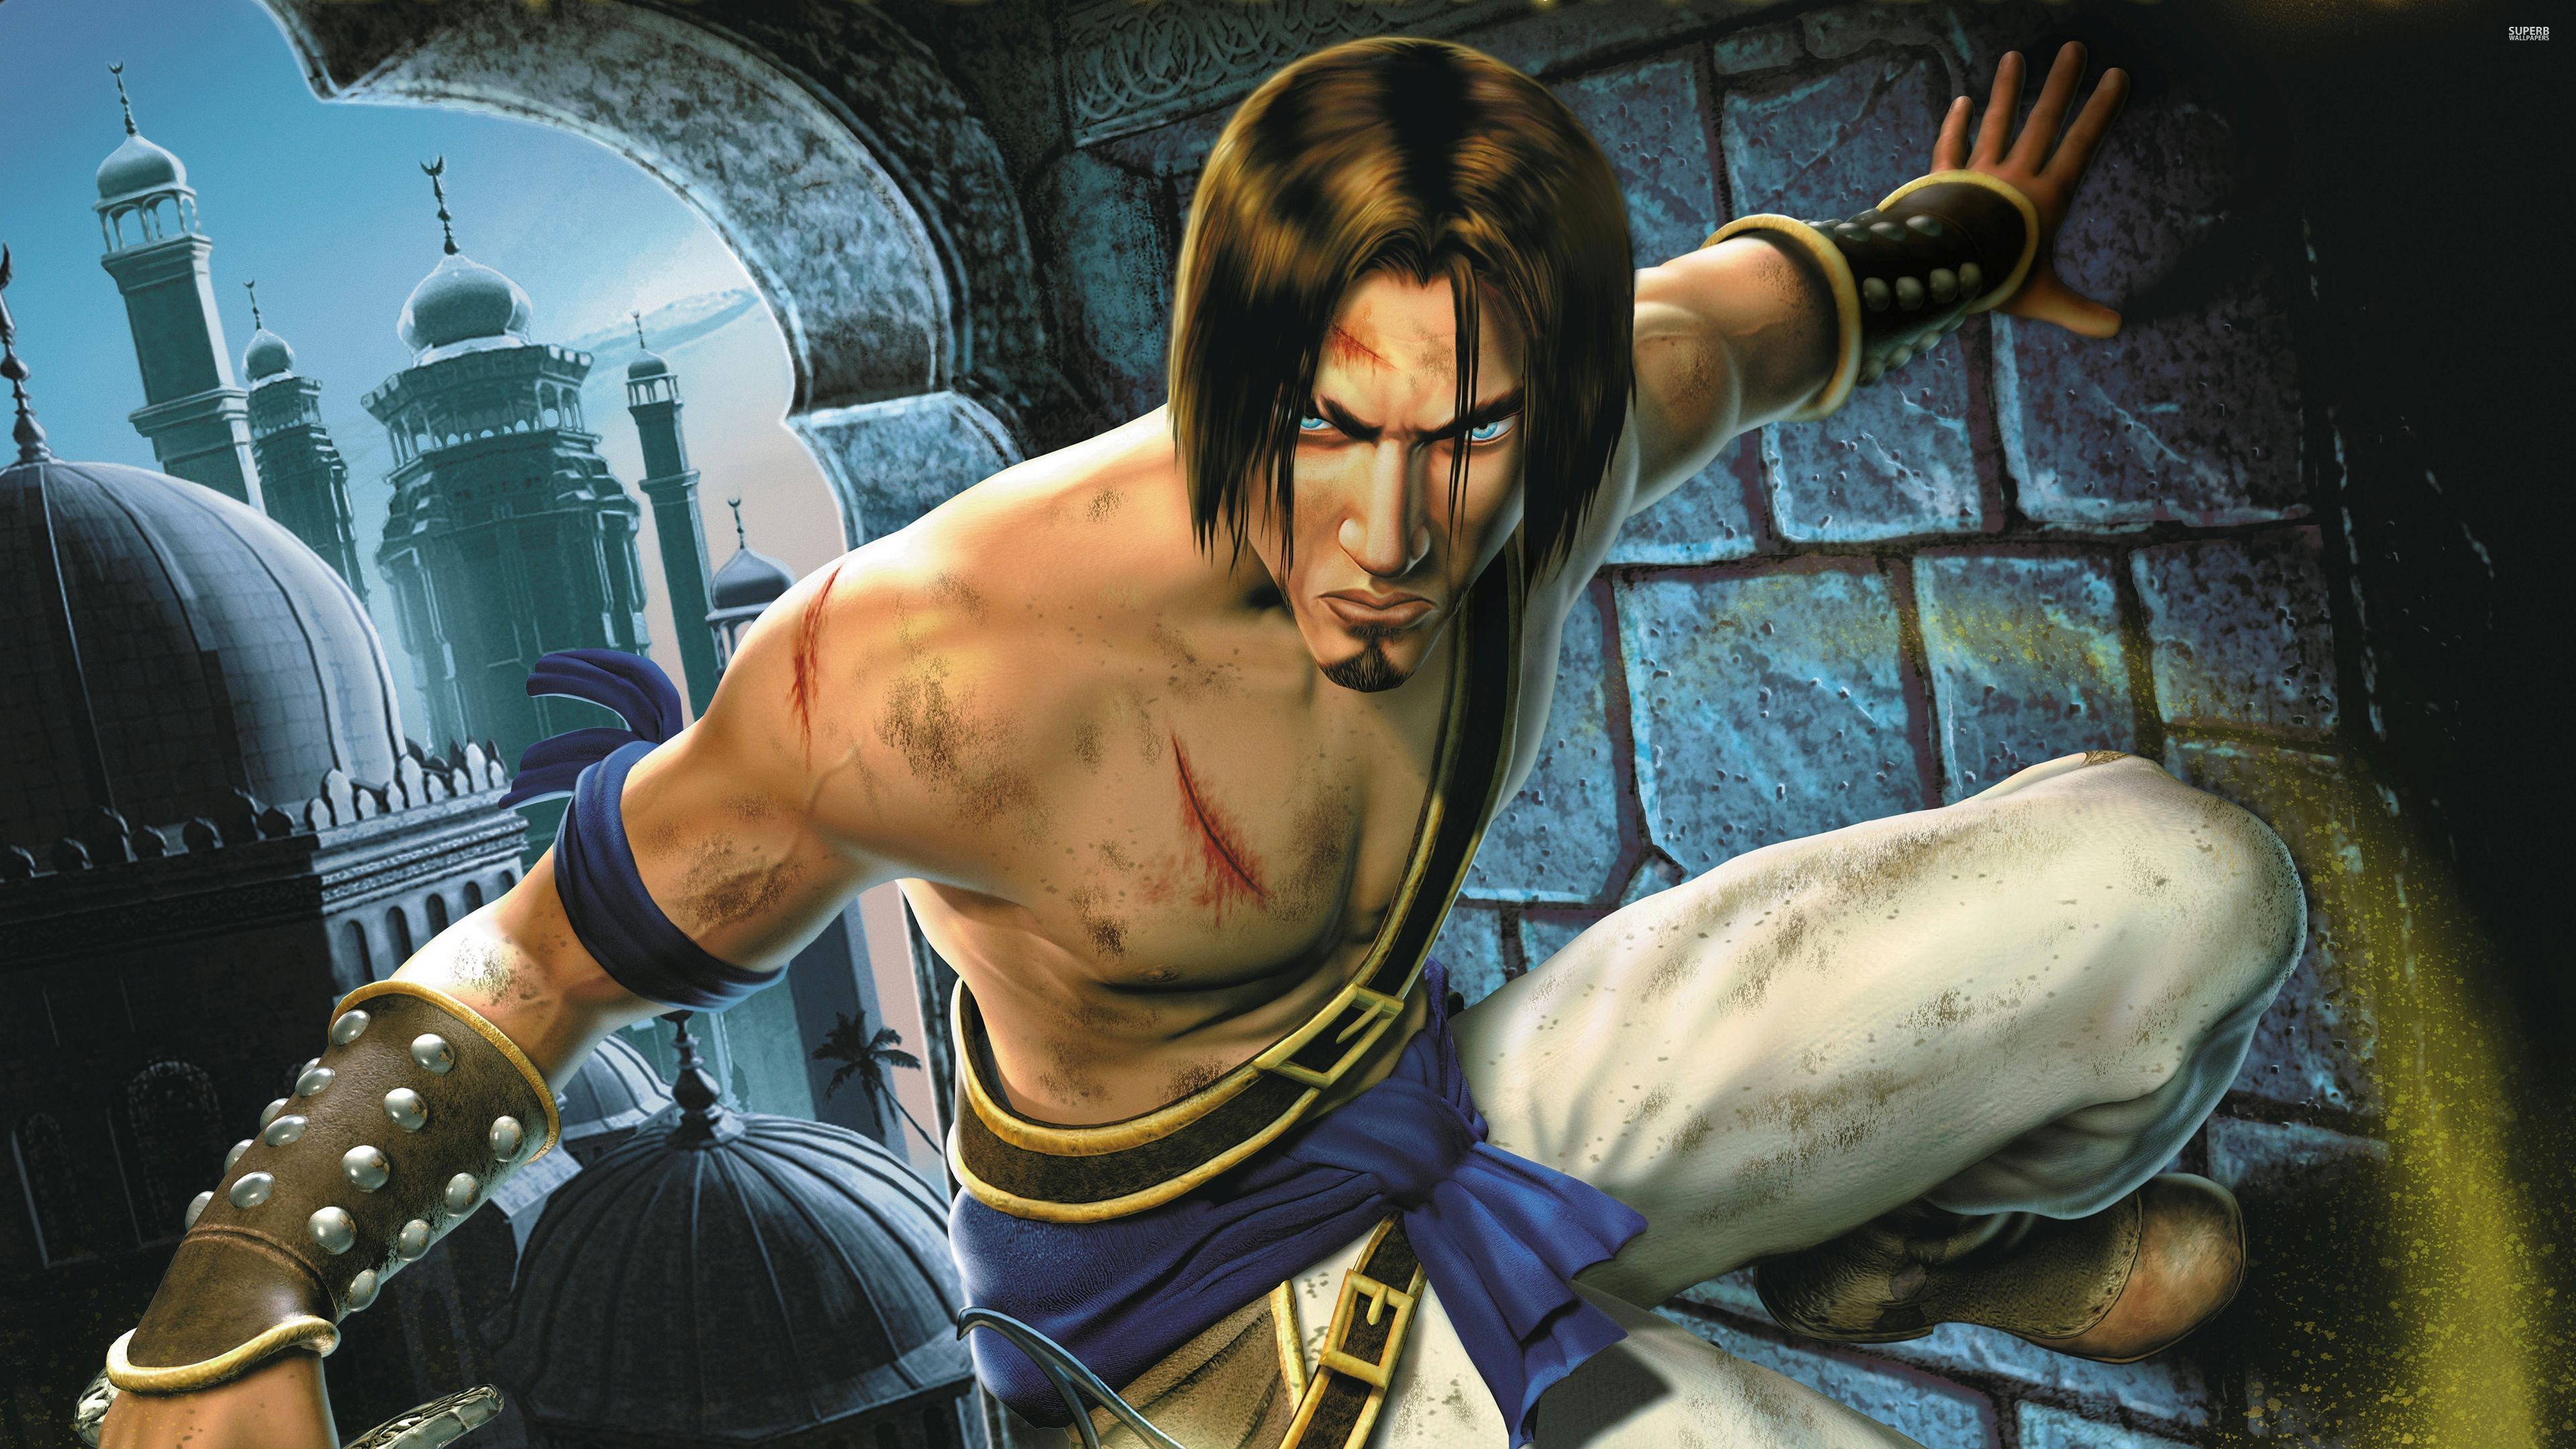 Prince of persia the sands of time pictures 9